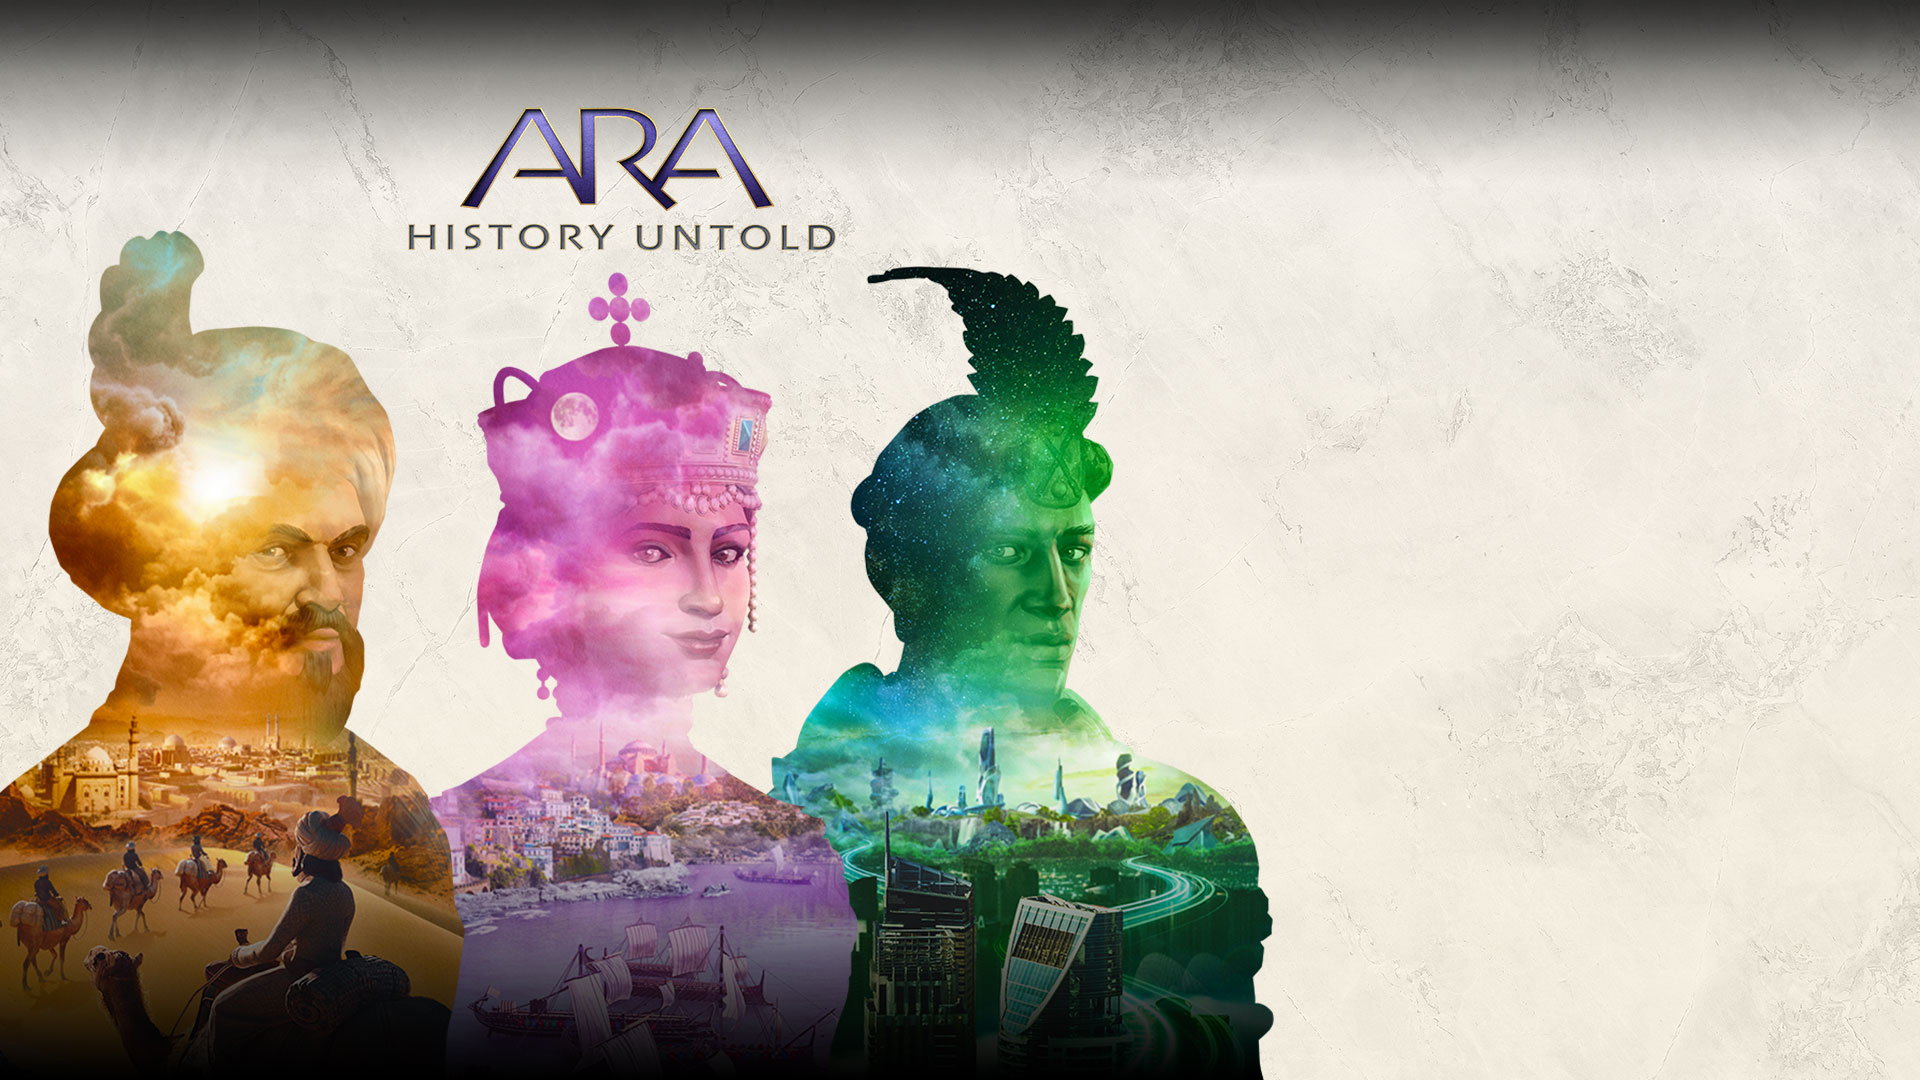 Ara: History Untold. Three transparent people with scenes from different cities inside their silhouettes.